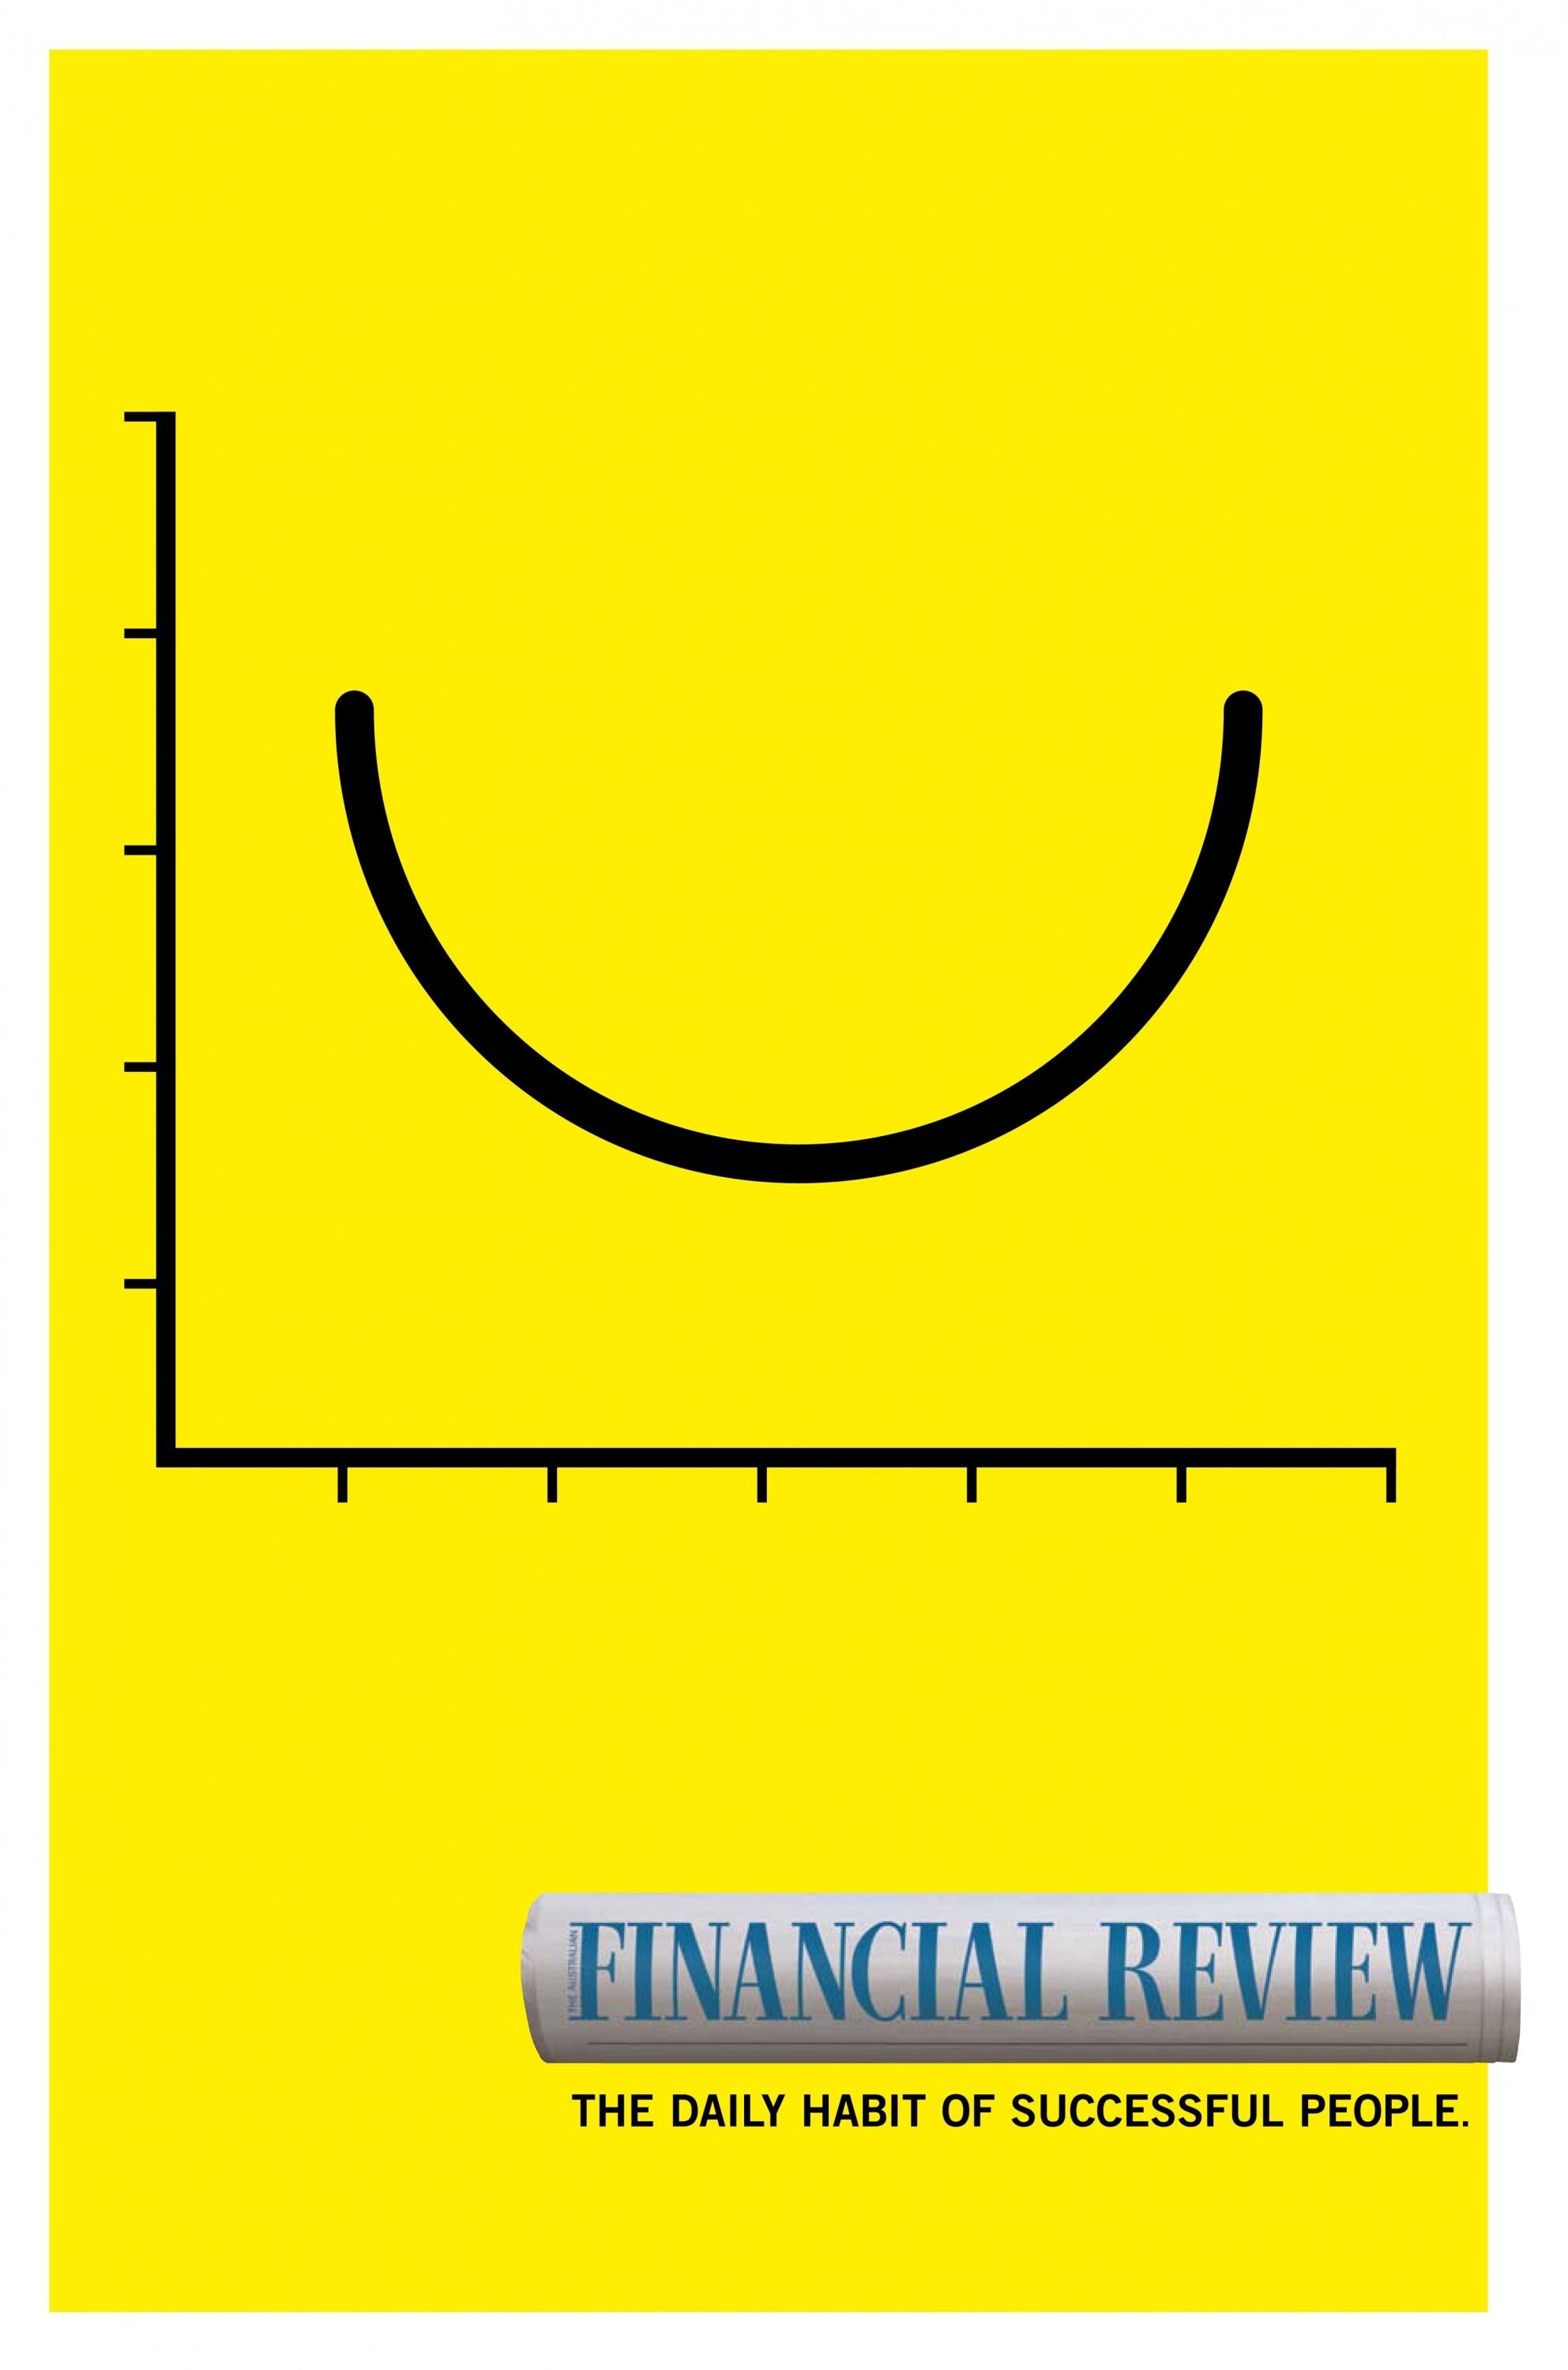 GRAPH WITH A SMILE